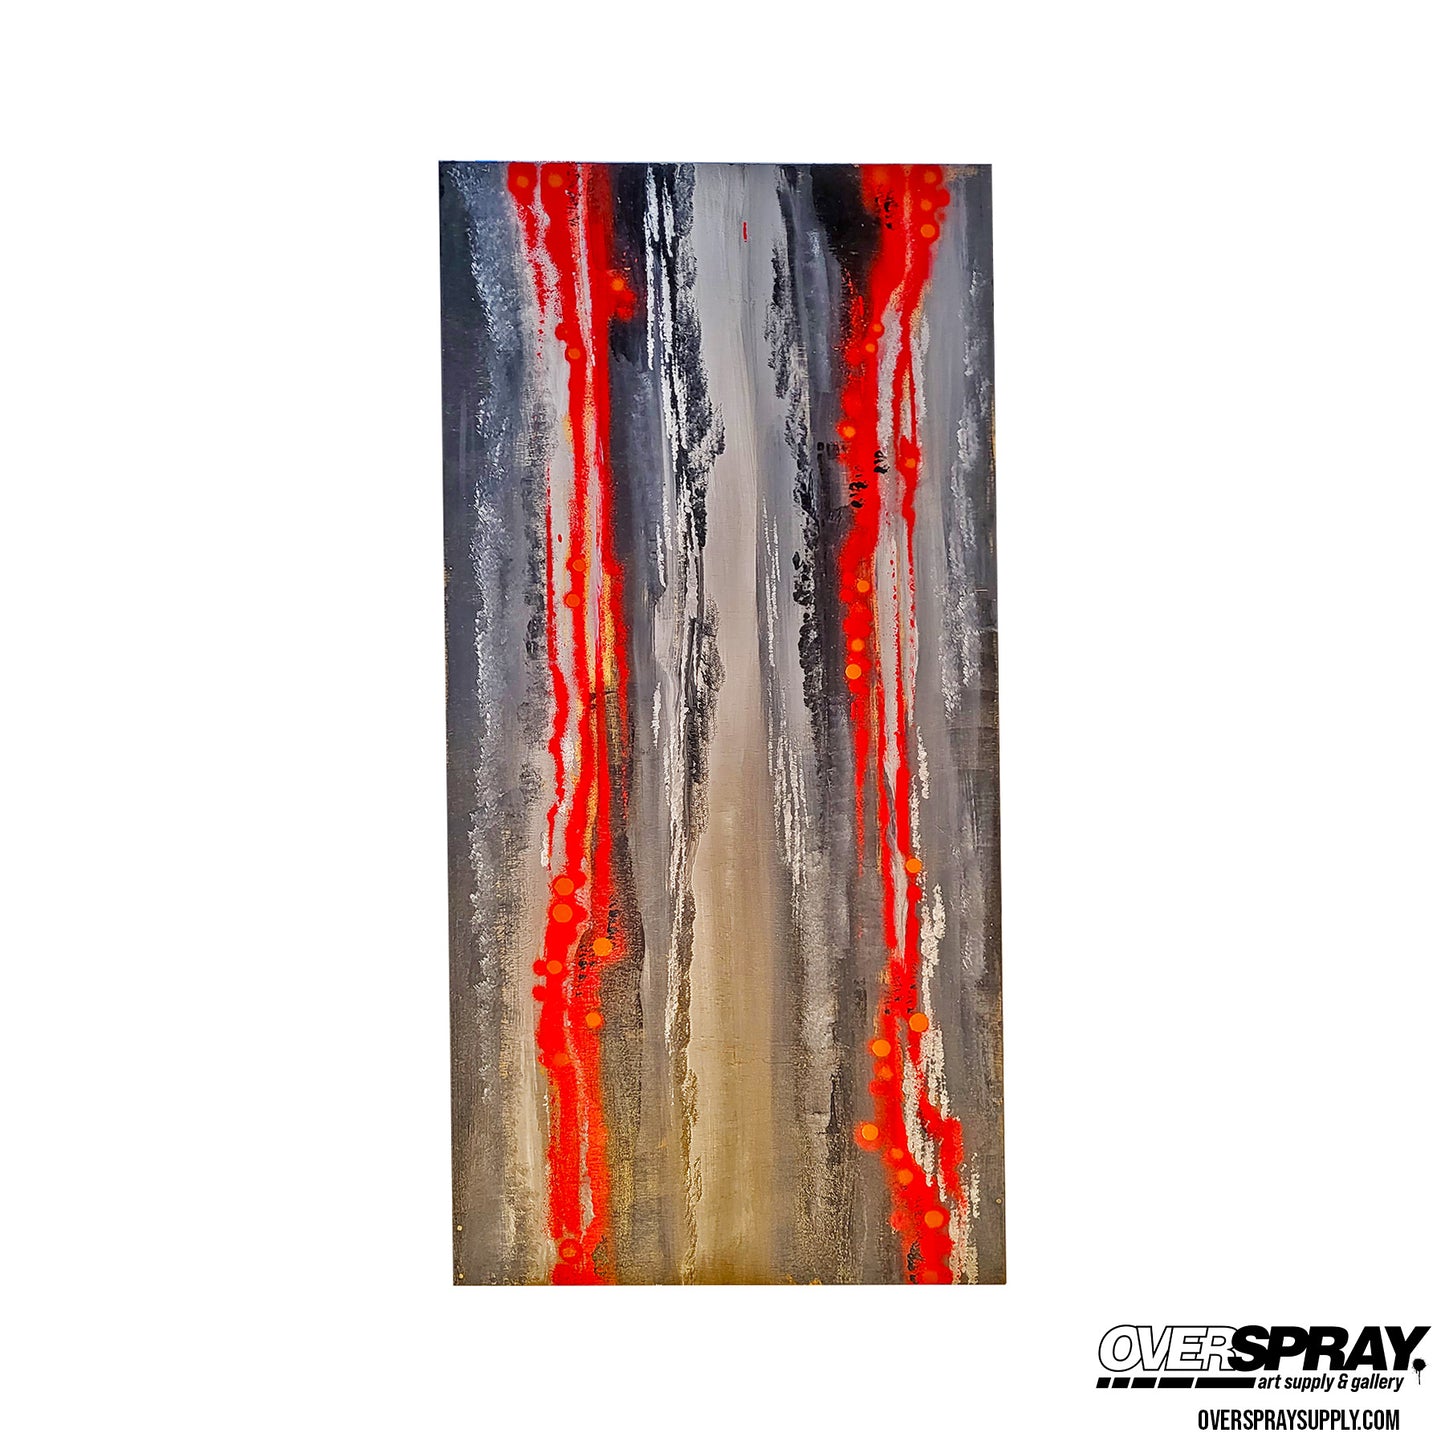 Long rectangle painting, bight red streaks run vertically along black and varied grey streaks